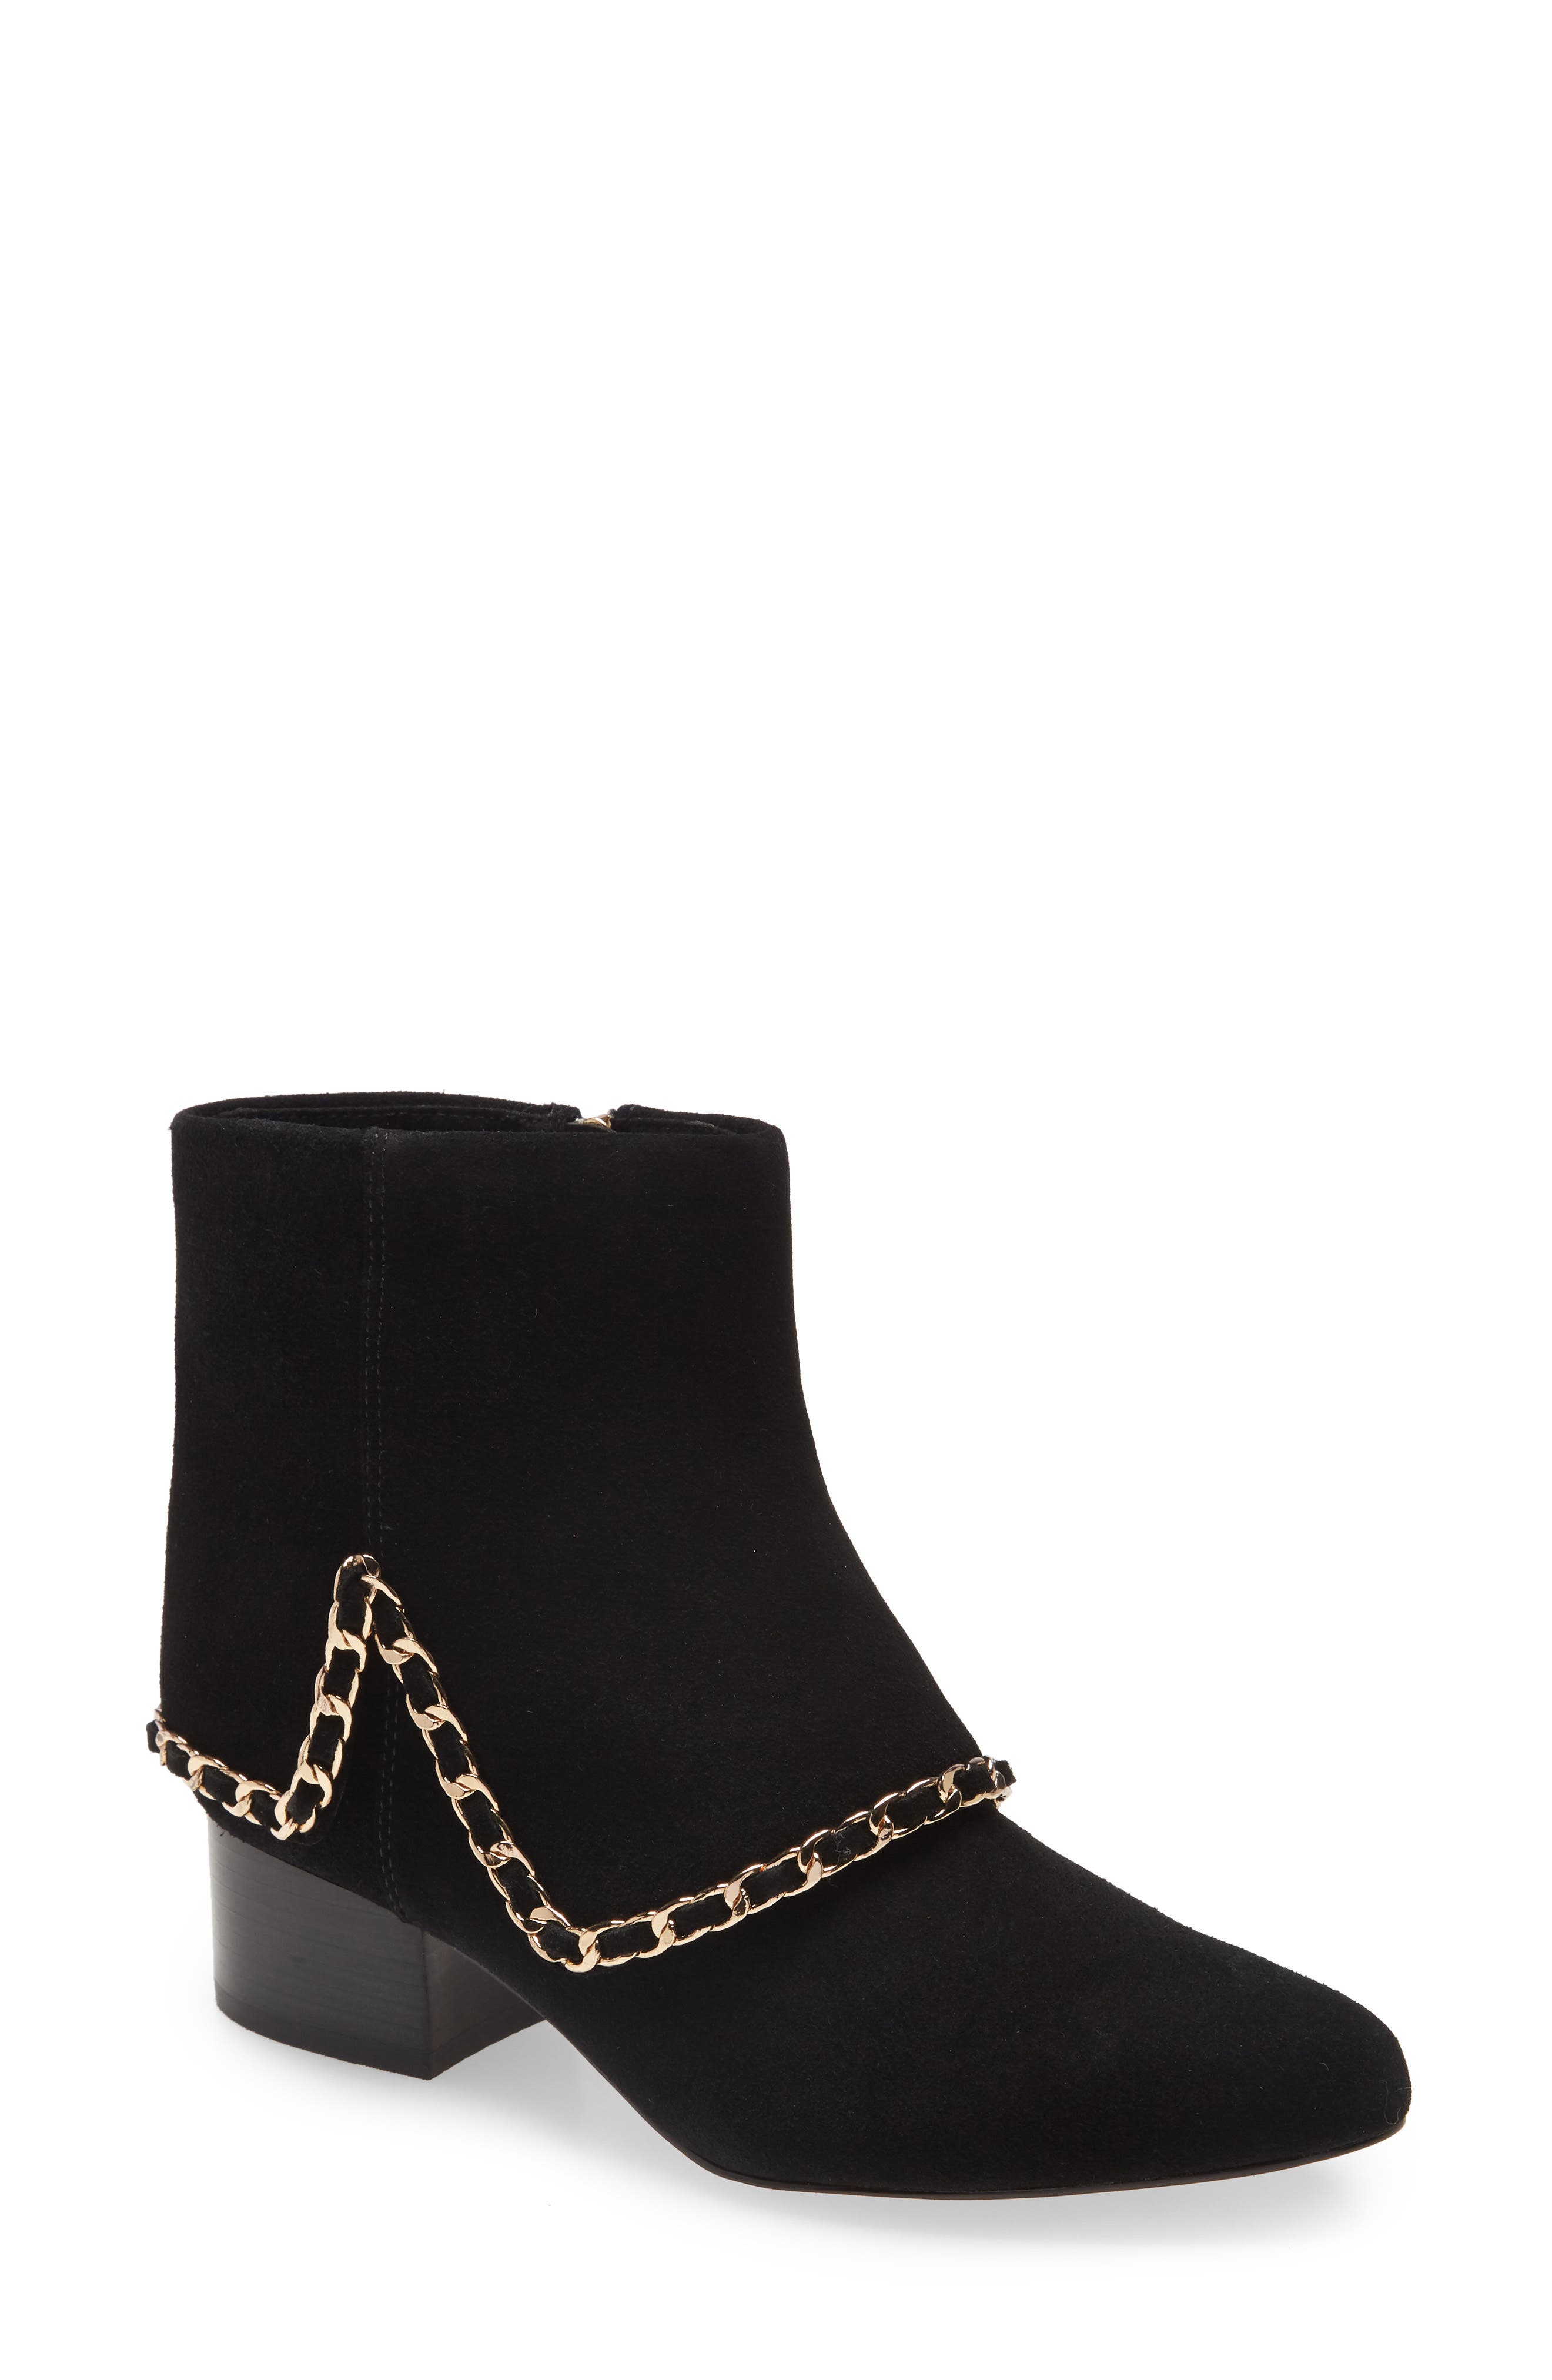 karl lagerfeld shiloh boots